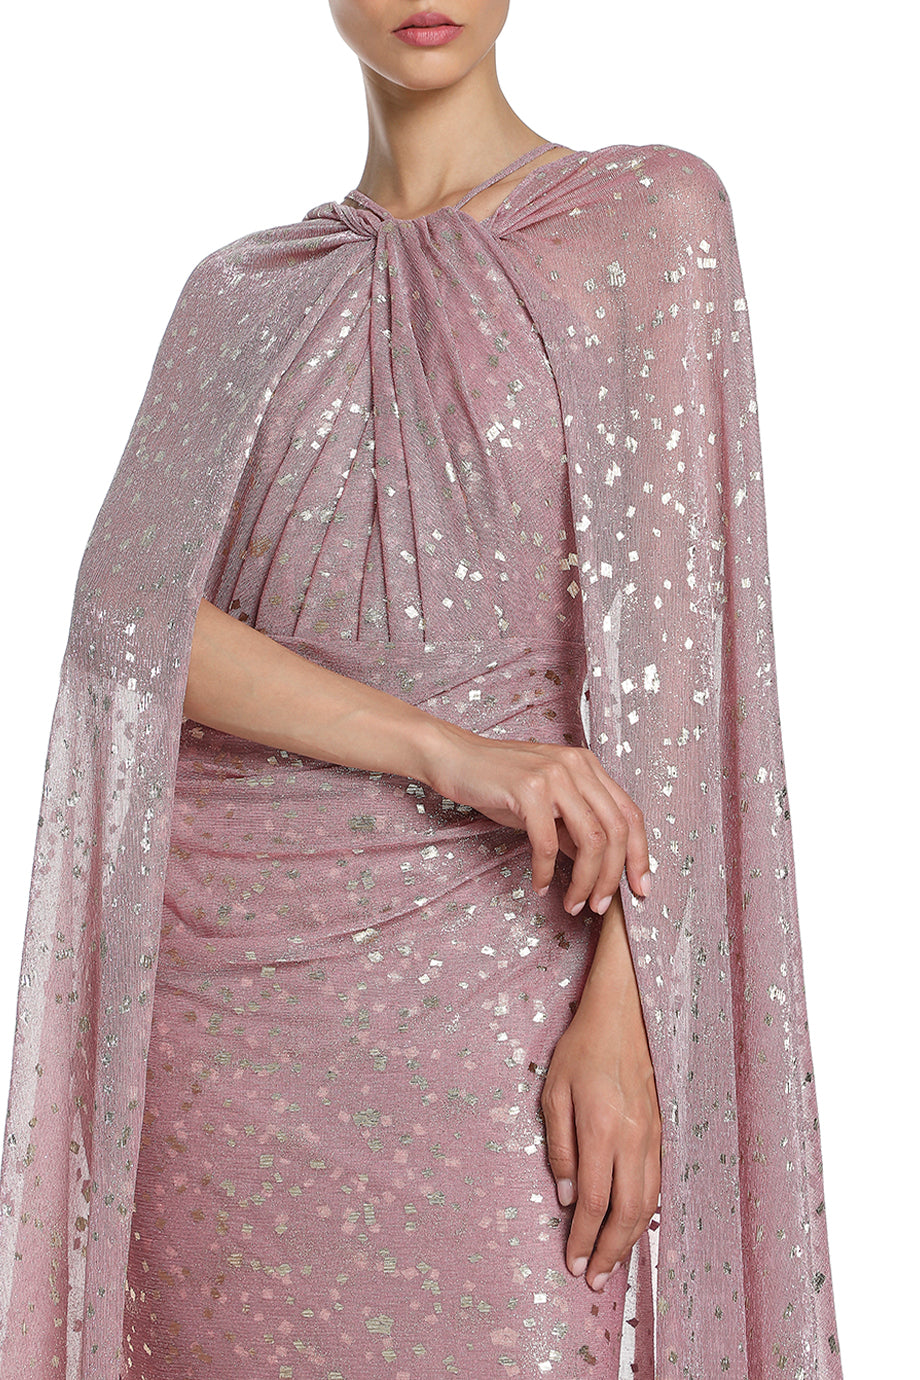 Speckle Evening Dress With Cape